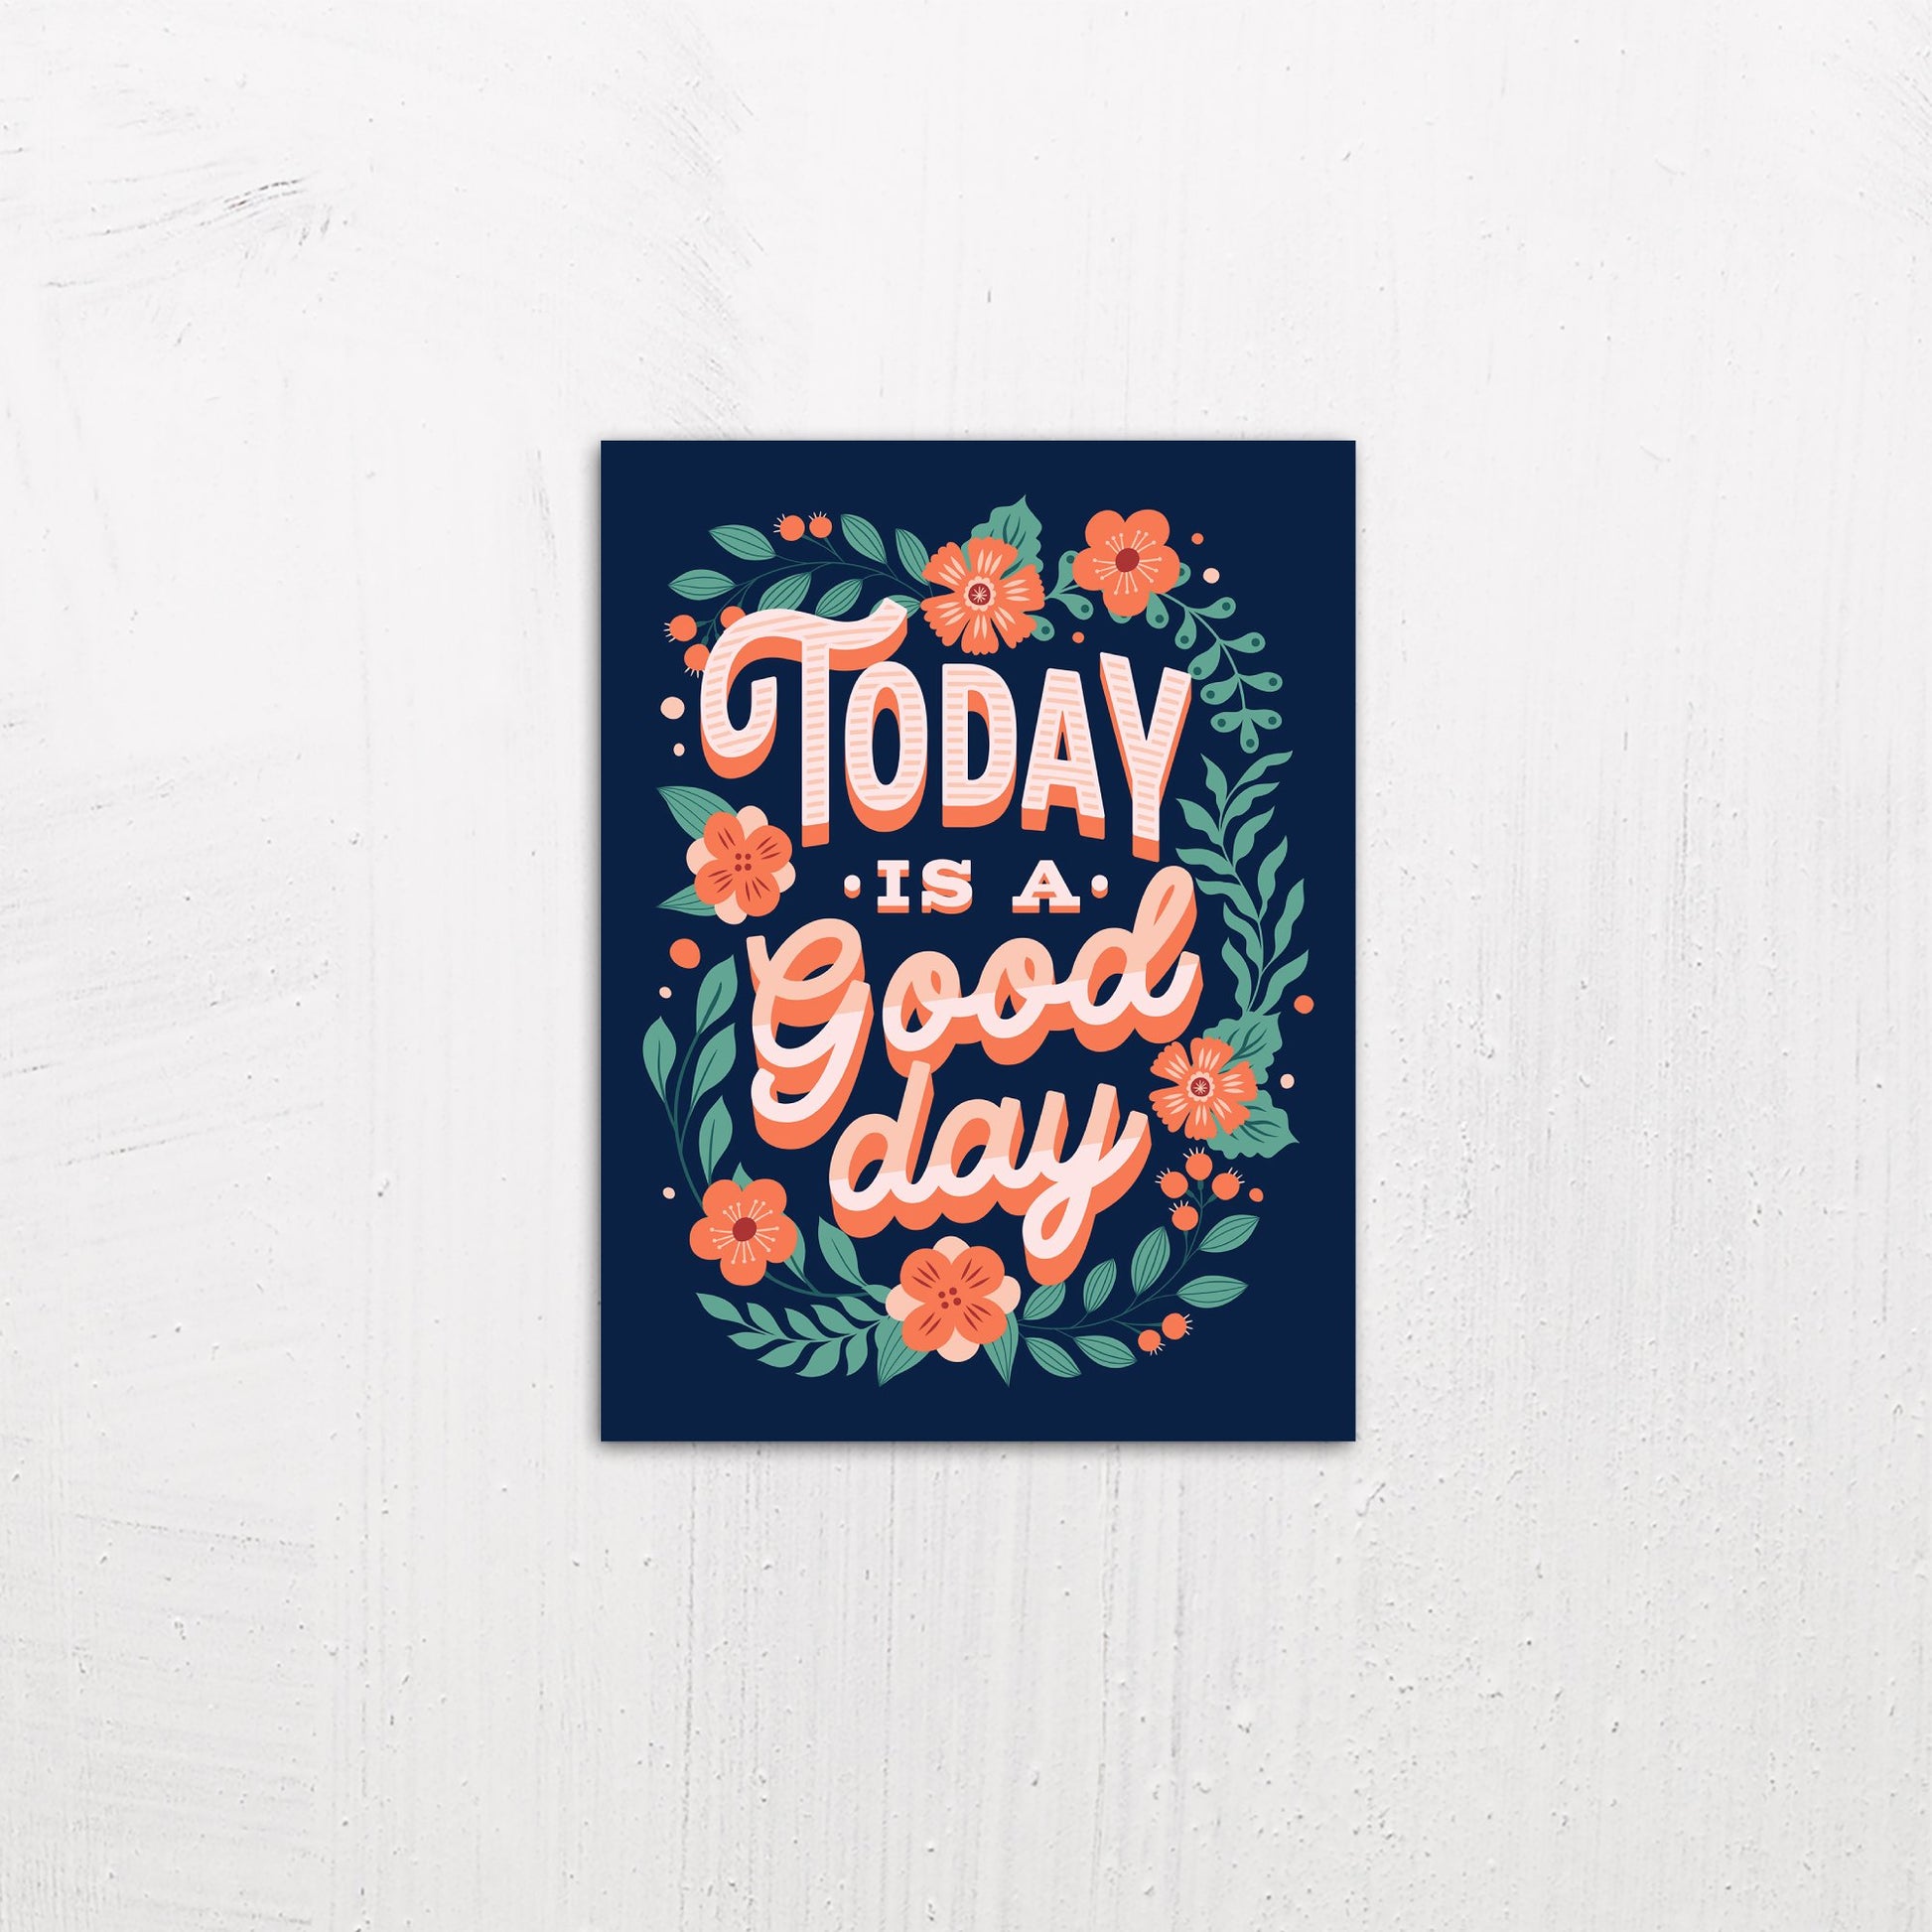 A small size metal art poster display plate with printed design of a Today is a Good Day Inspirational Quote